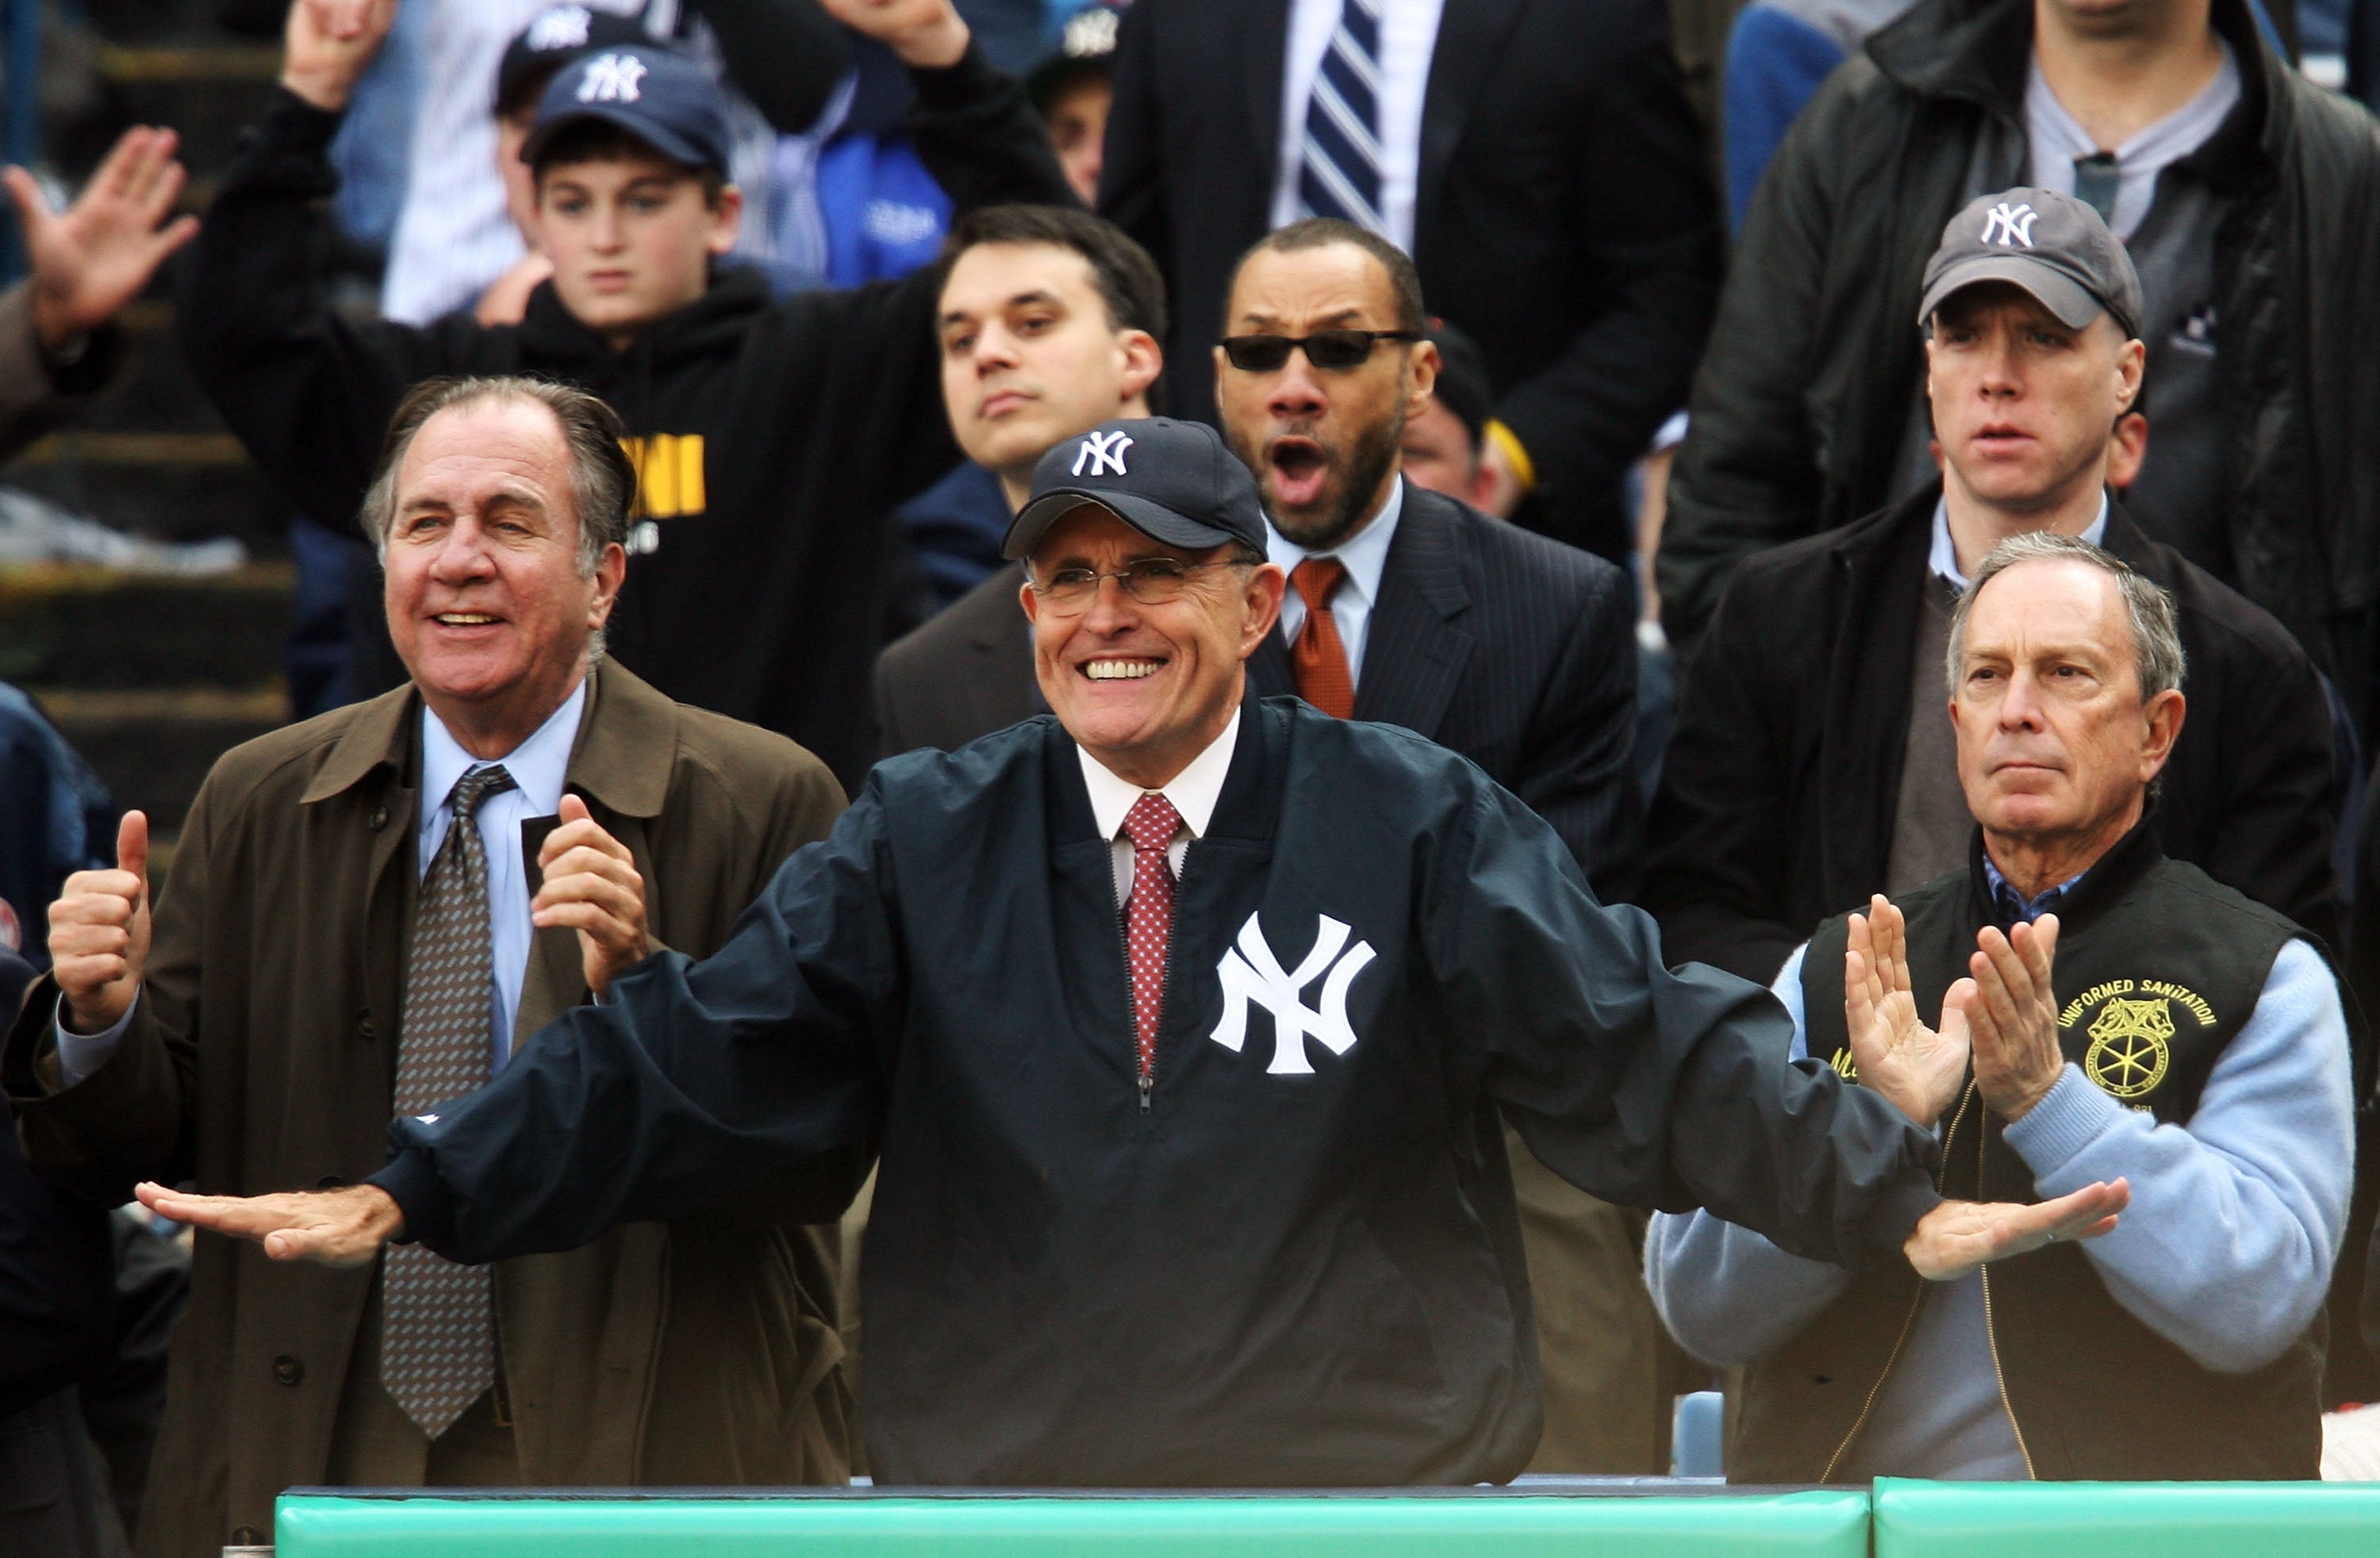 Former New York City Mayor Rudolph Giuliani and then-mayor Michael Bloomberg watch the New York Yankees play the Tampa Bay Devil Rays during their Opening Day game at Yankee Stadium April 2, 2007. Giuliani now faces a litany of legal and financial issues.